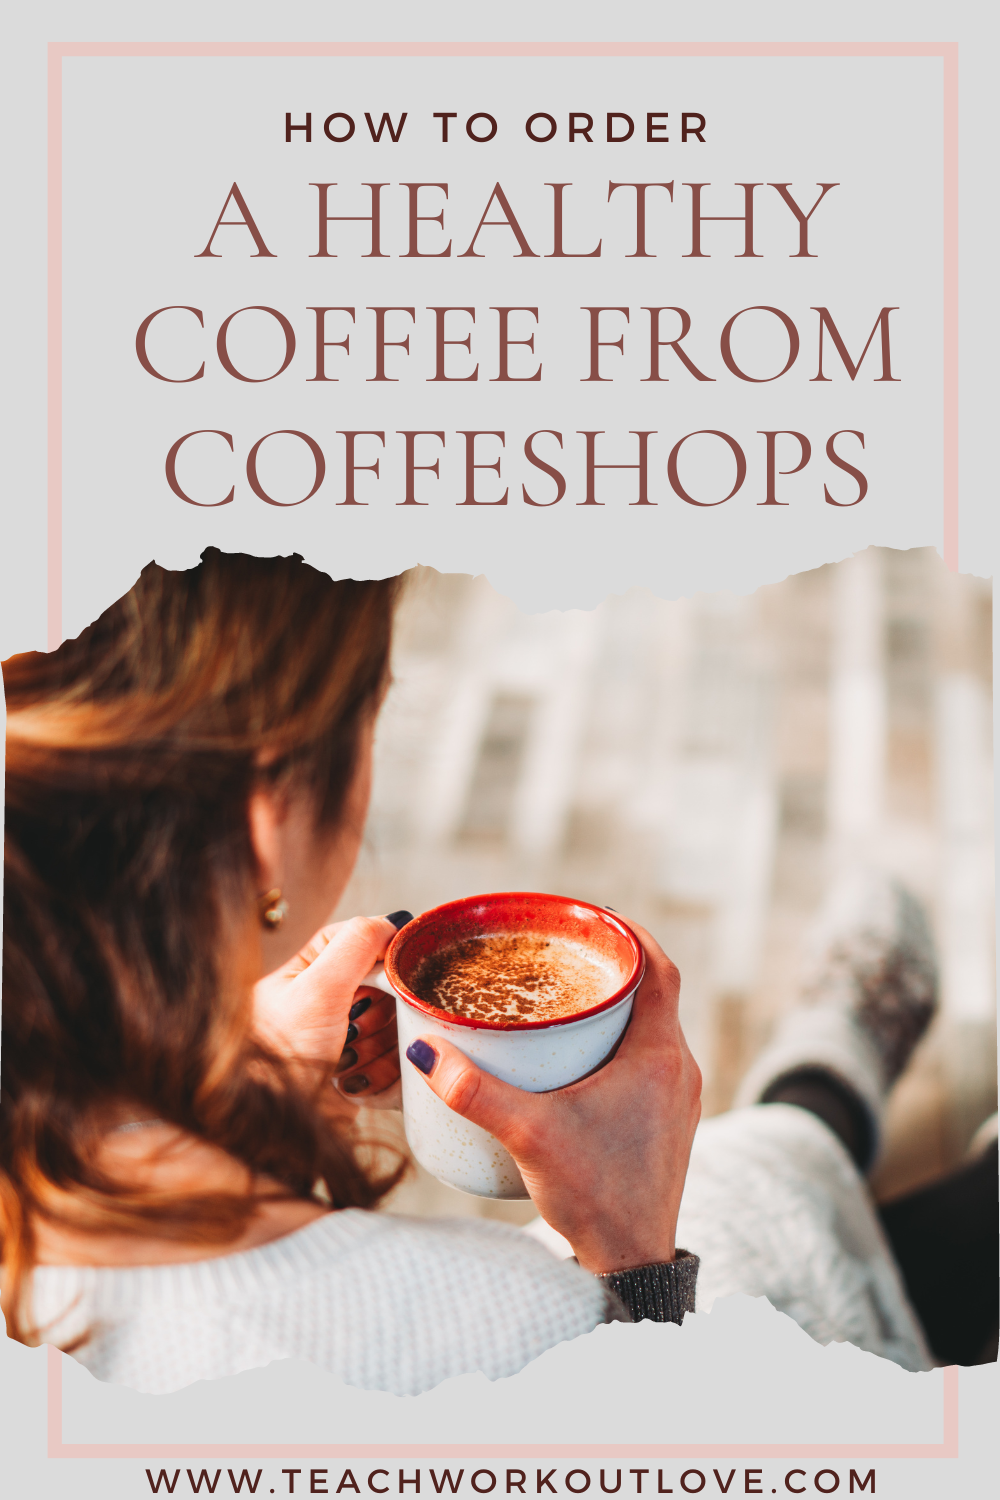 The good news is that you can still enjoy having coffee from Starbucks, but you will have to make some edits and tweaks to the type of coffee that you order in order for it to become a healthy choice that fits with your diet.